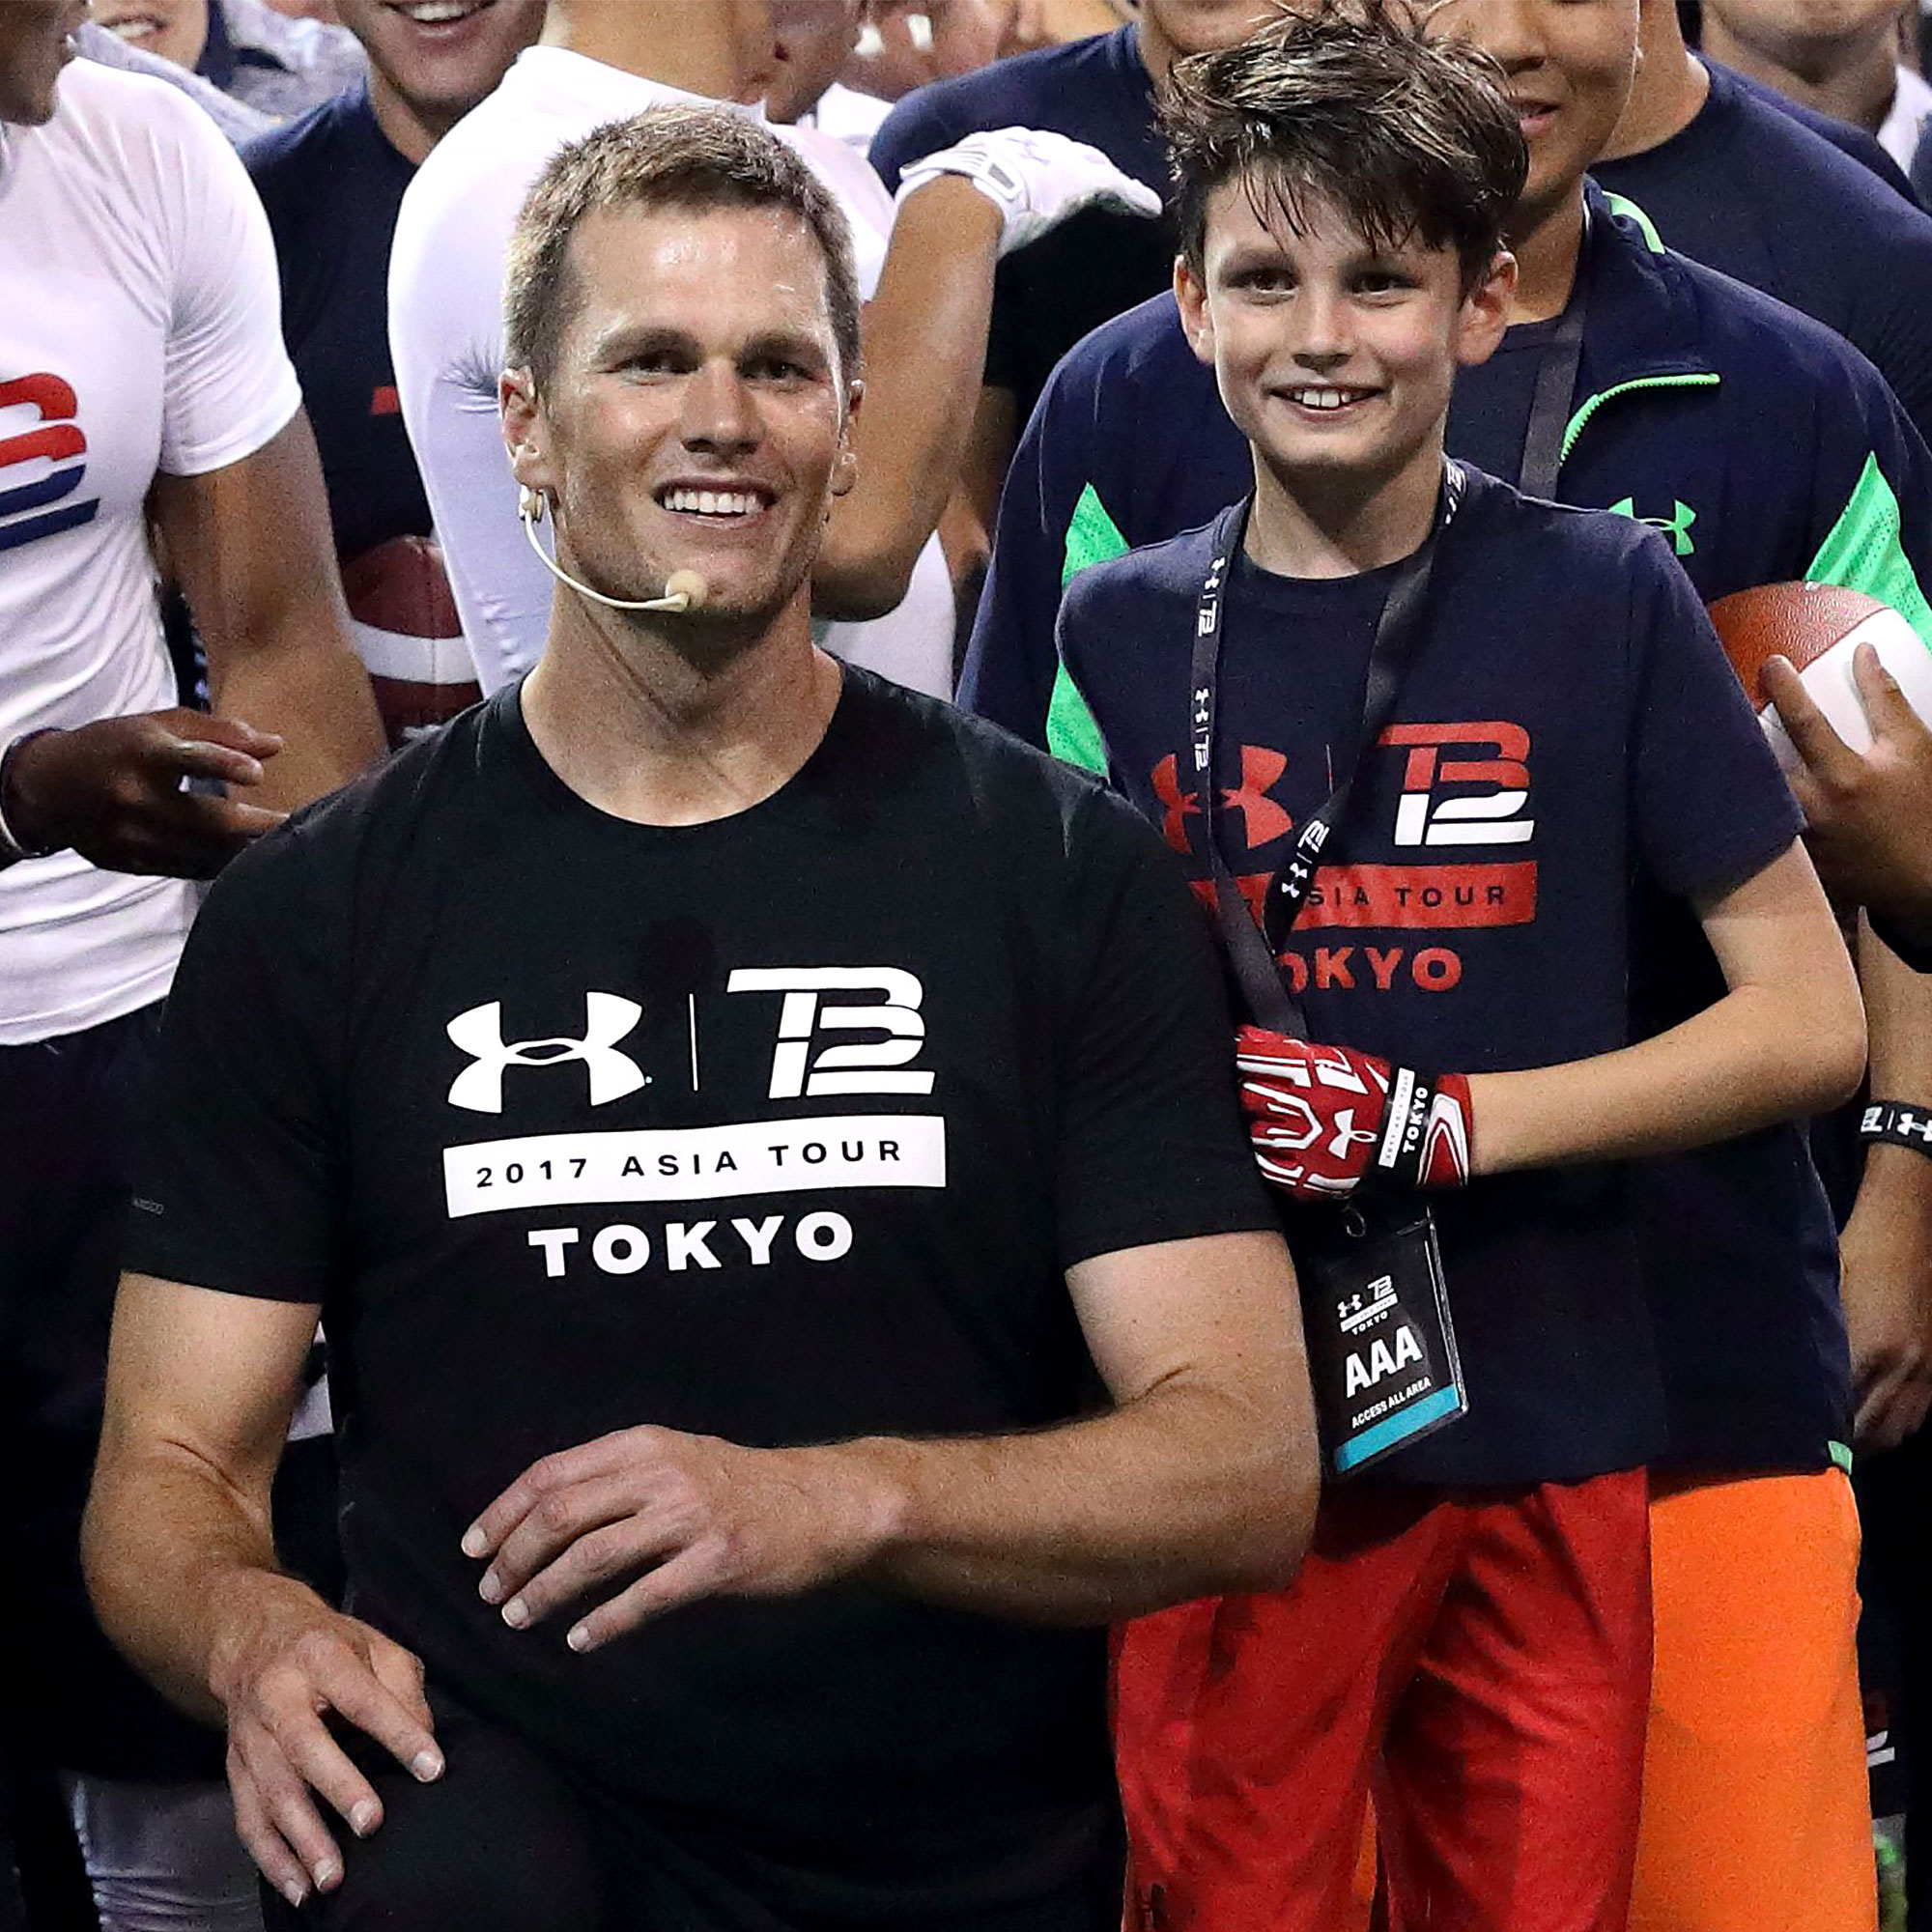 He's the Nicest Guy Ever”: Mother of Tom Brady's Son Bridget